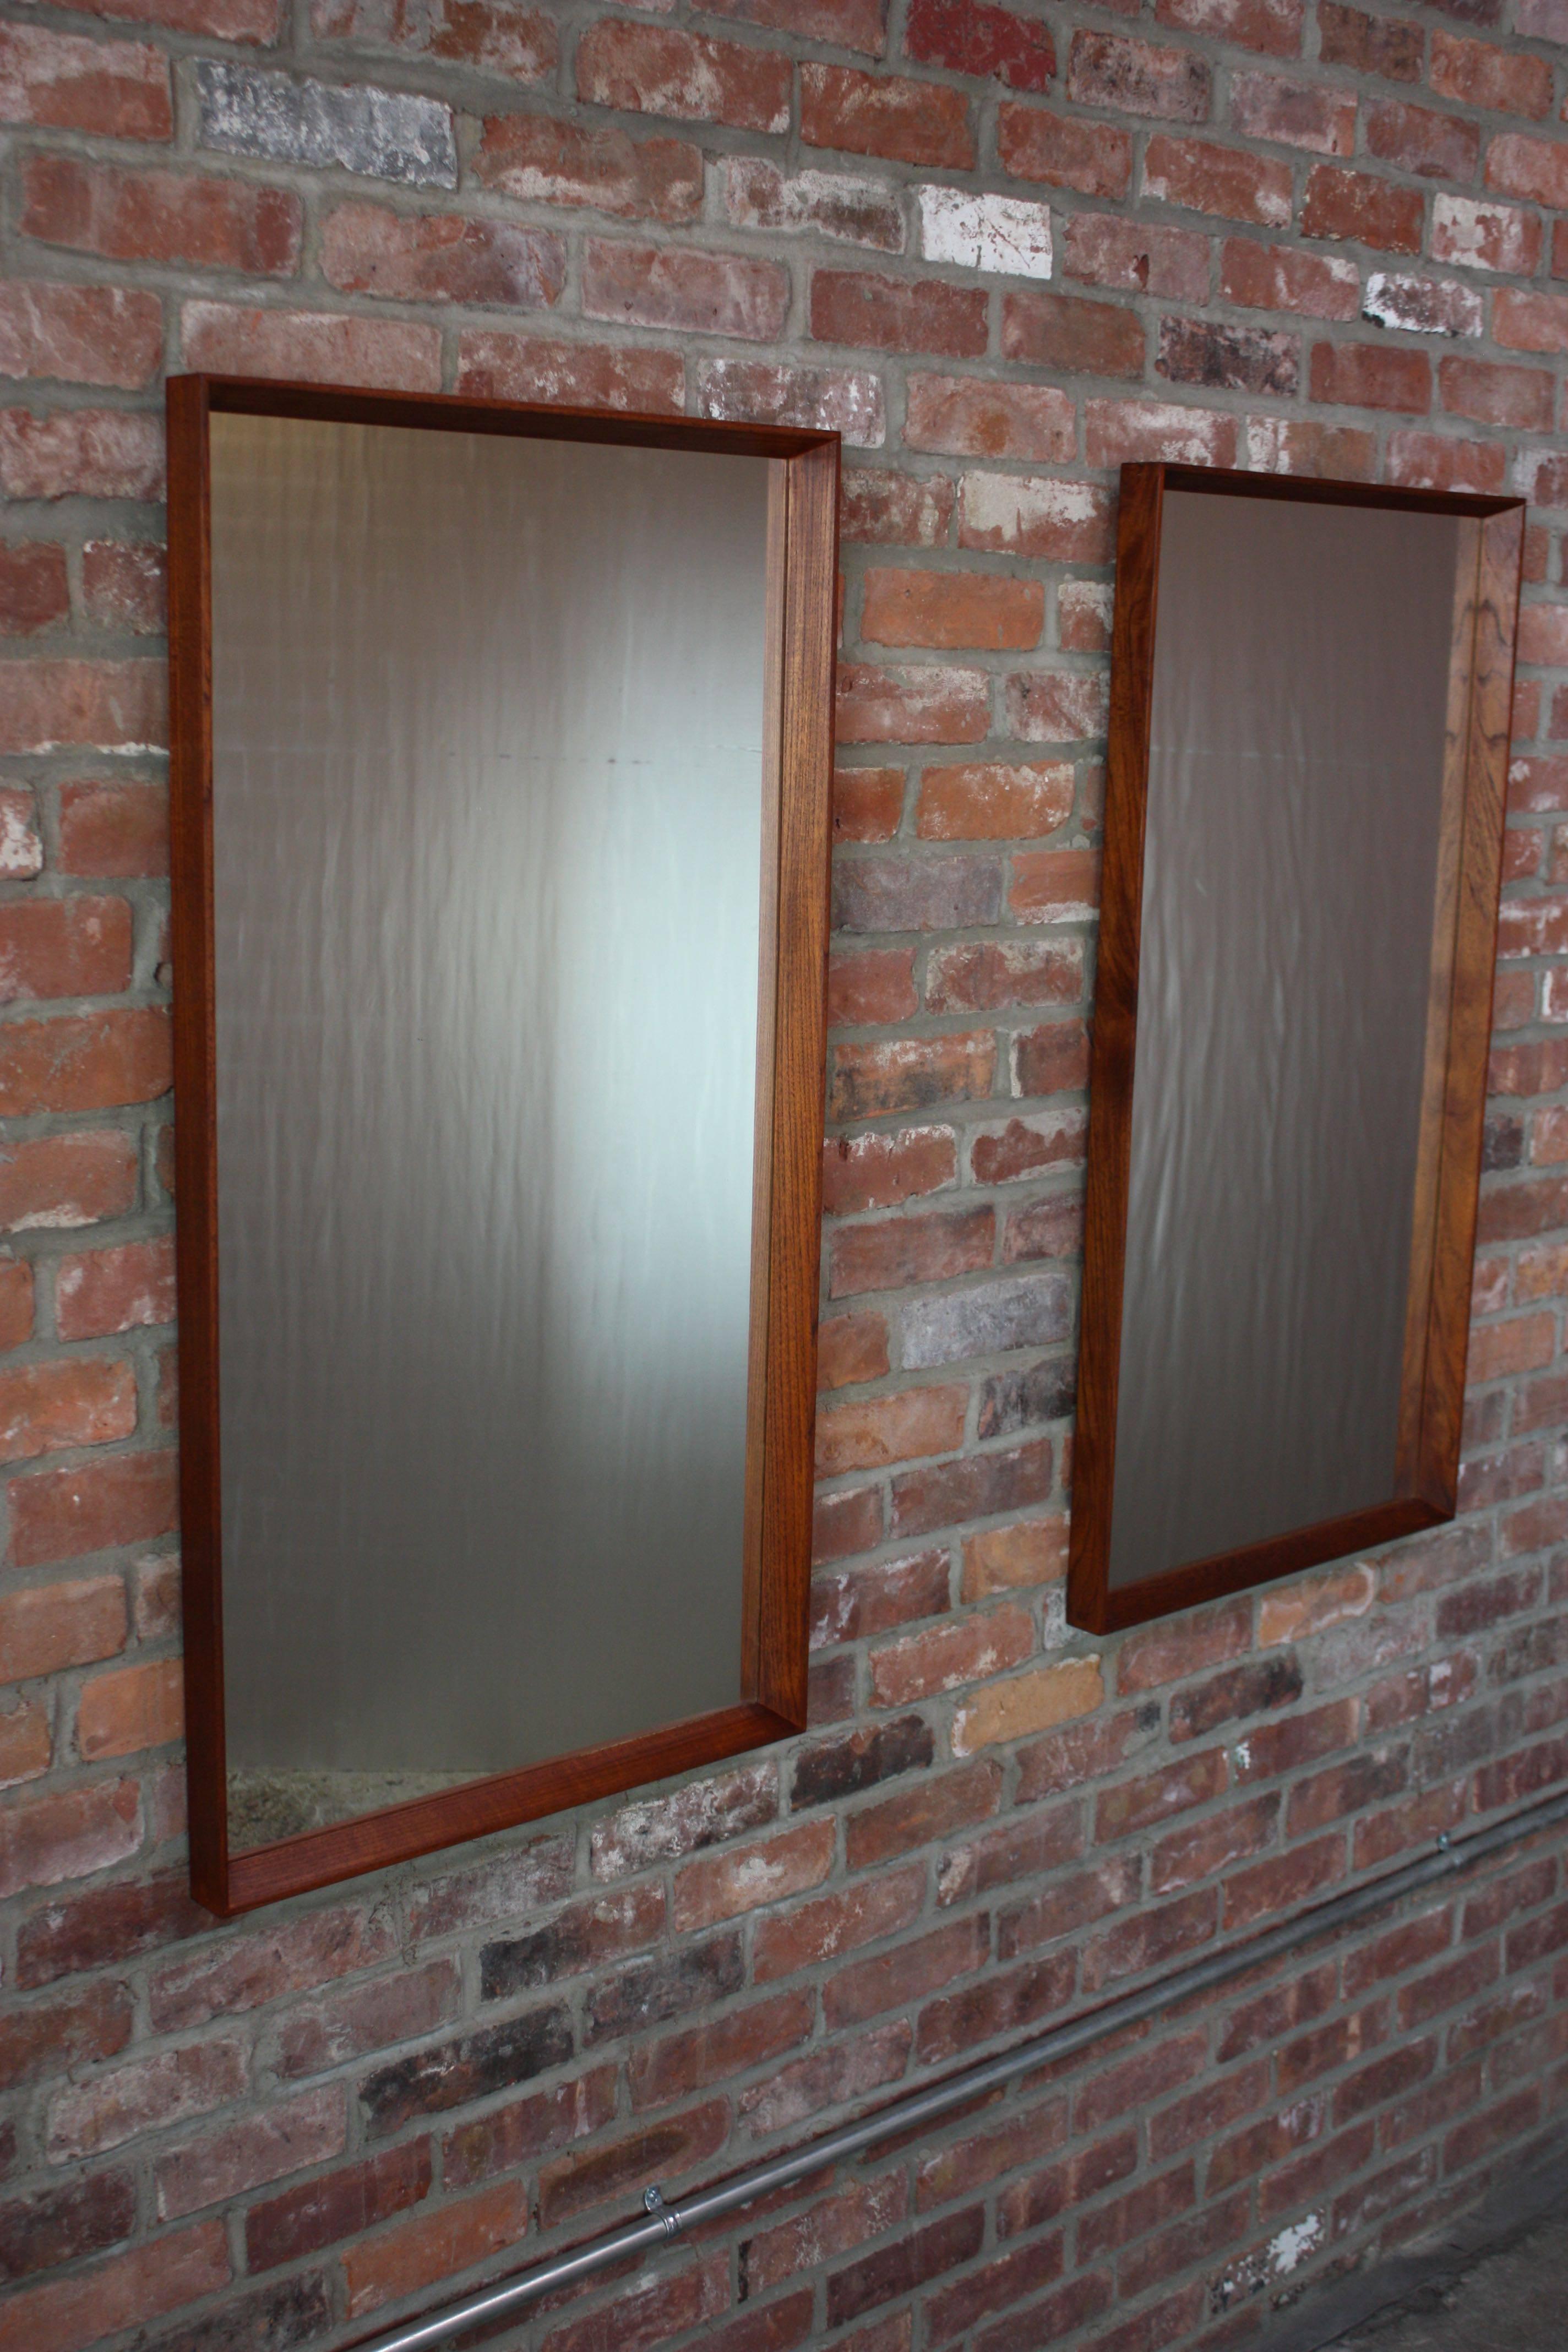 Nice pair of 1960s Danish Modern teak-framed mirrors by Pedersen & Hansen. 
Beautiful, refinished condition. Mirrors themselves are clean, with no issues. 
Sold as a pair.